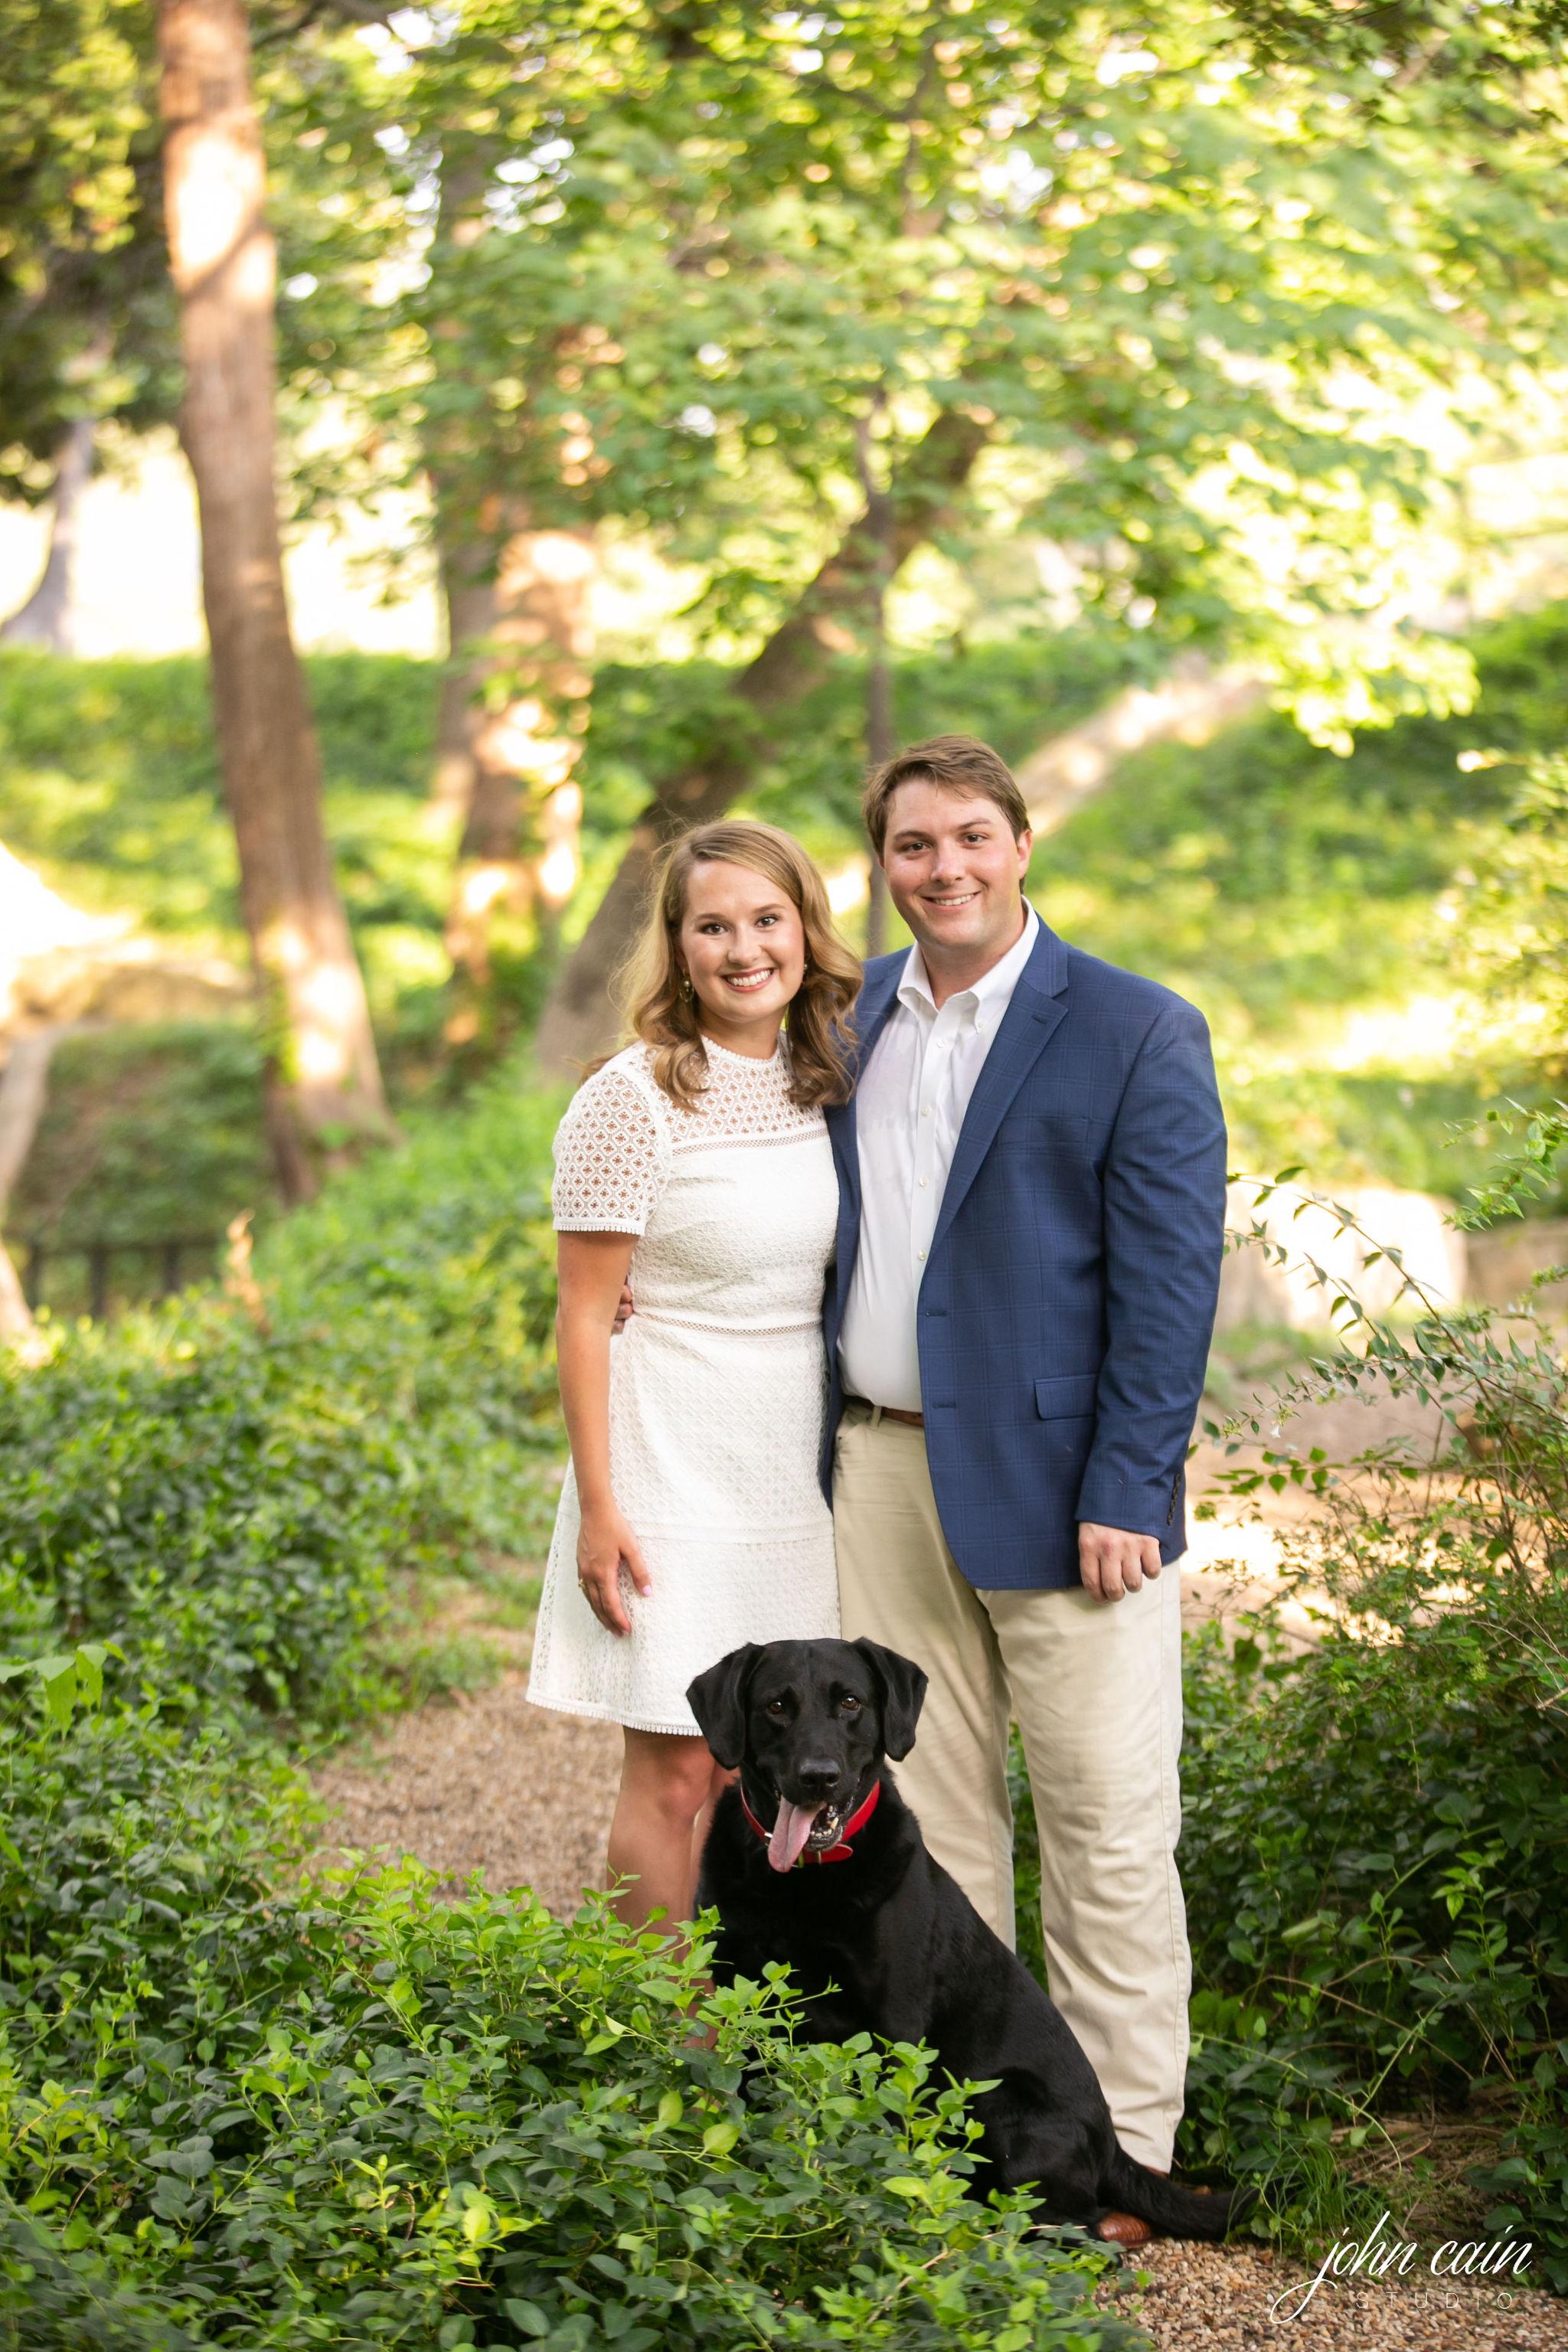 The Wedding Website of Meredith Cozby and Jamie King